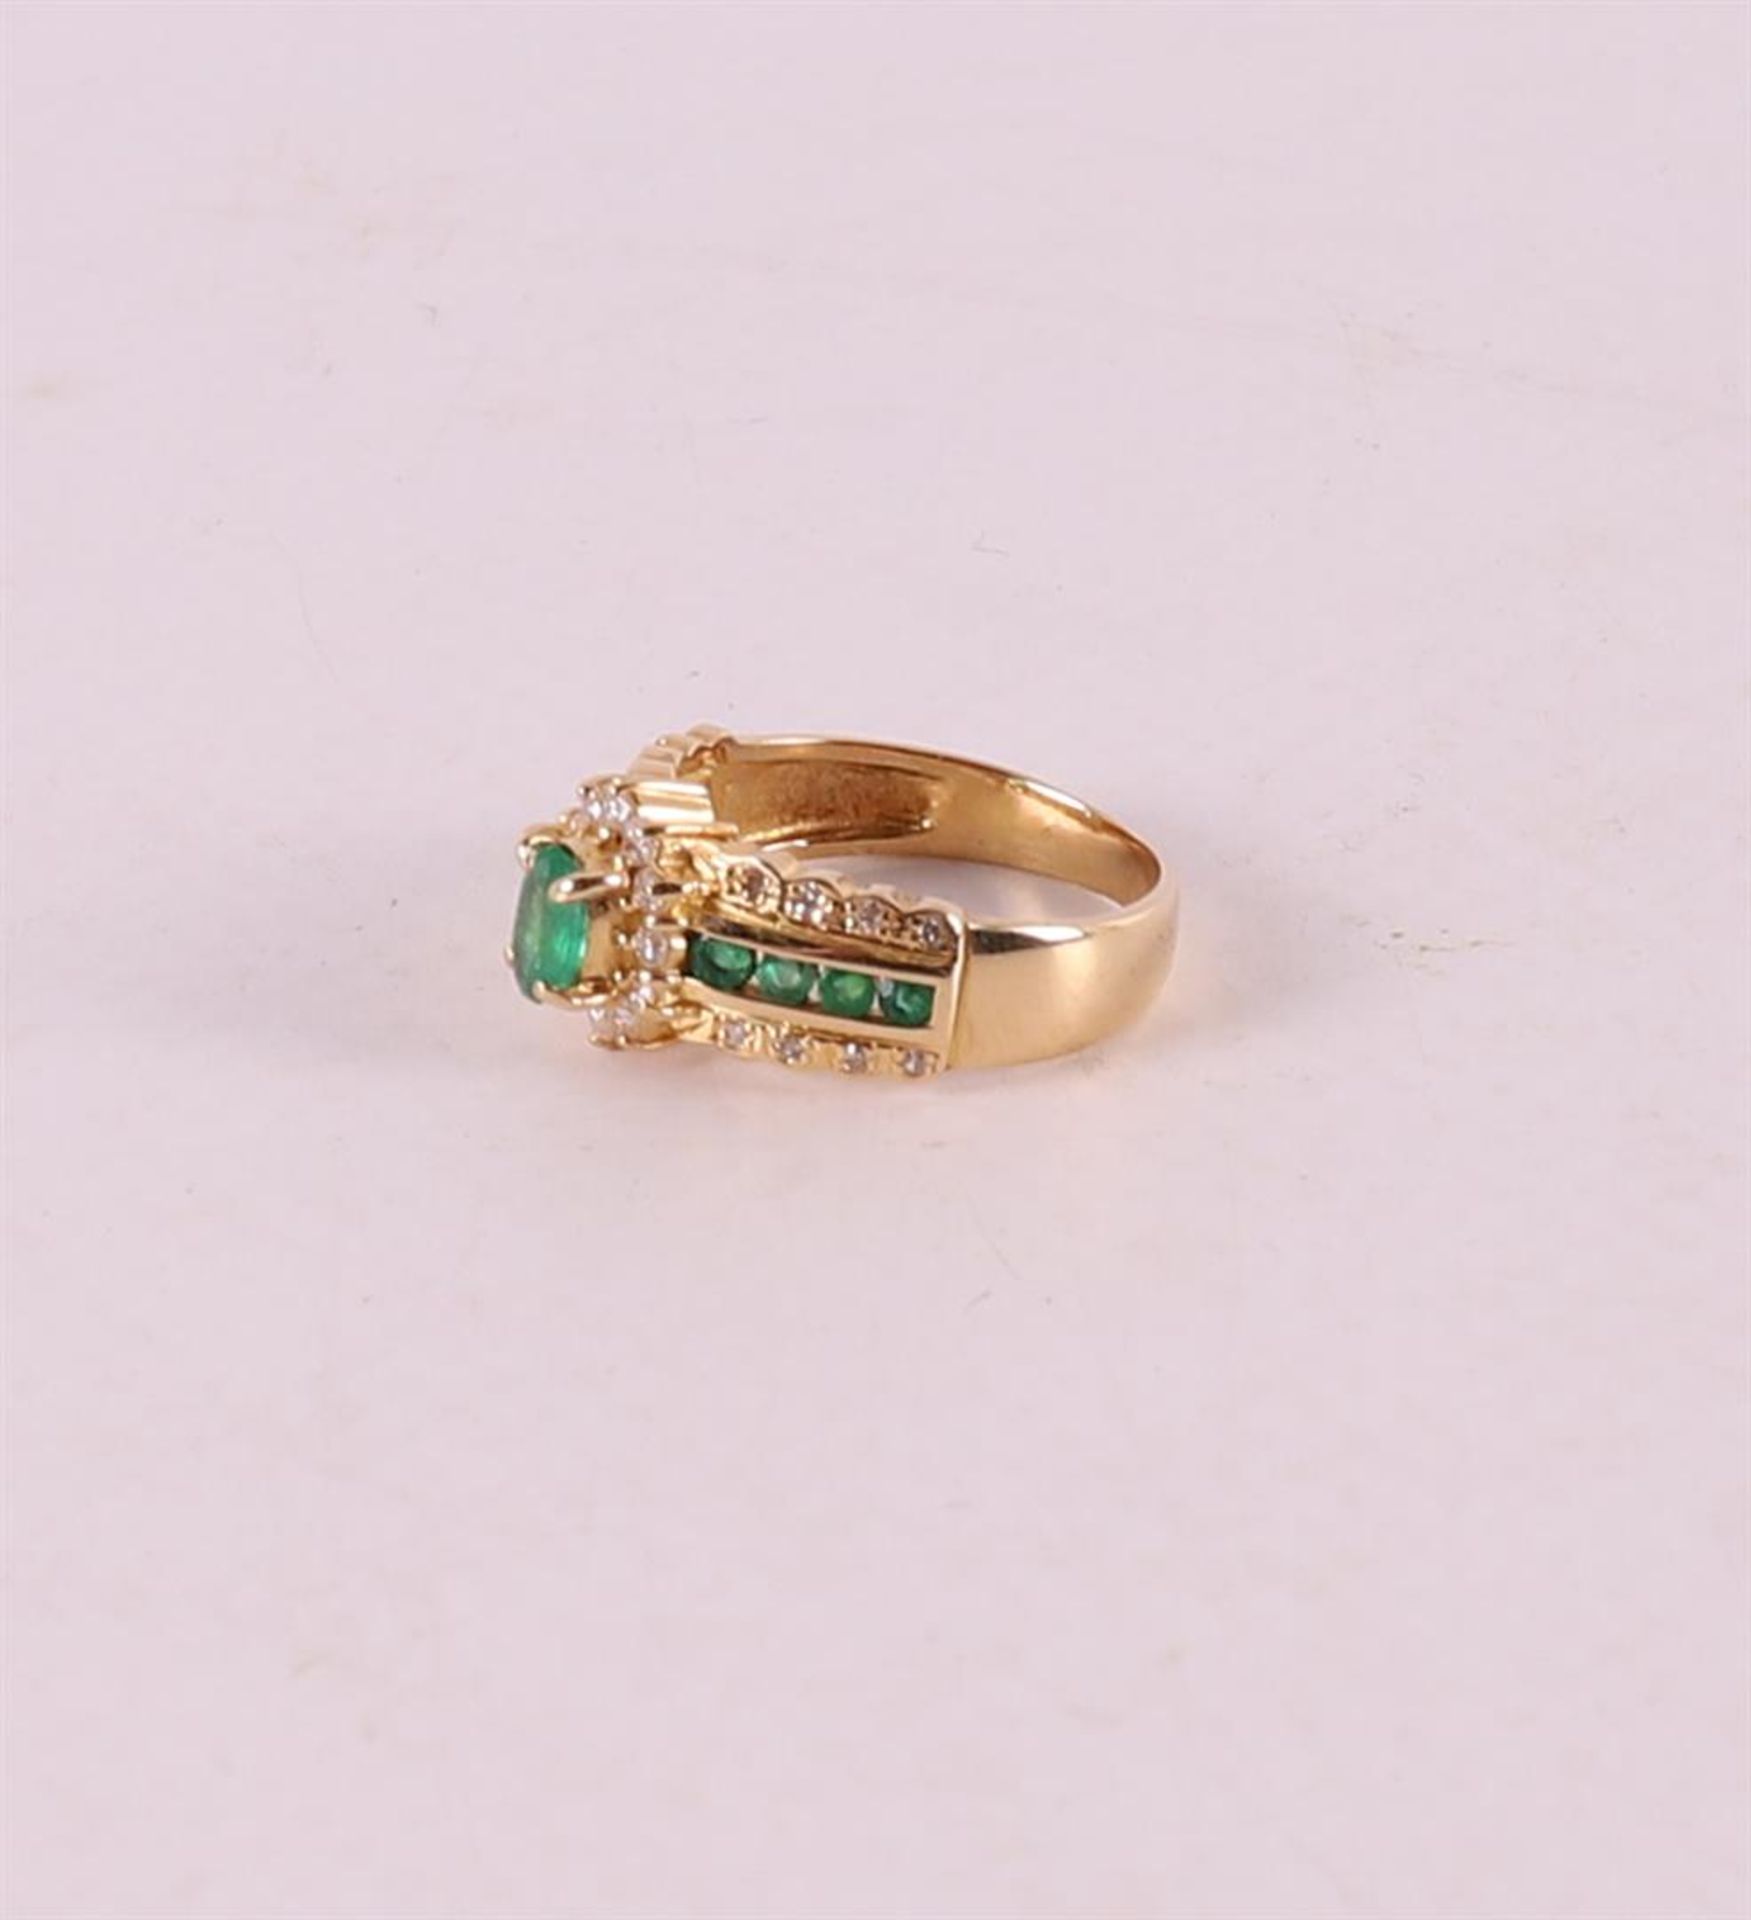 An 18 kt 750/1000 yellow gold ring set with green emerald and 28 diamonds. - Image 2 of 3